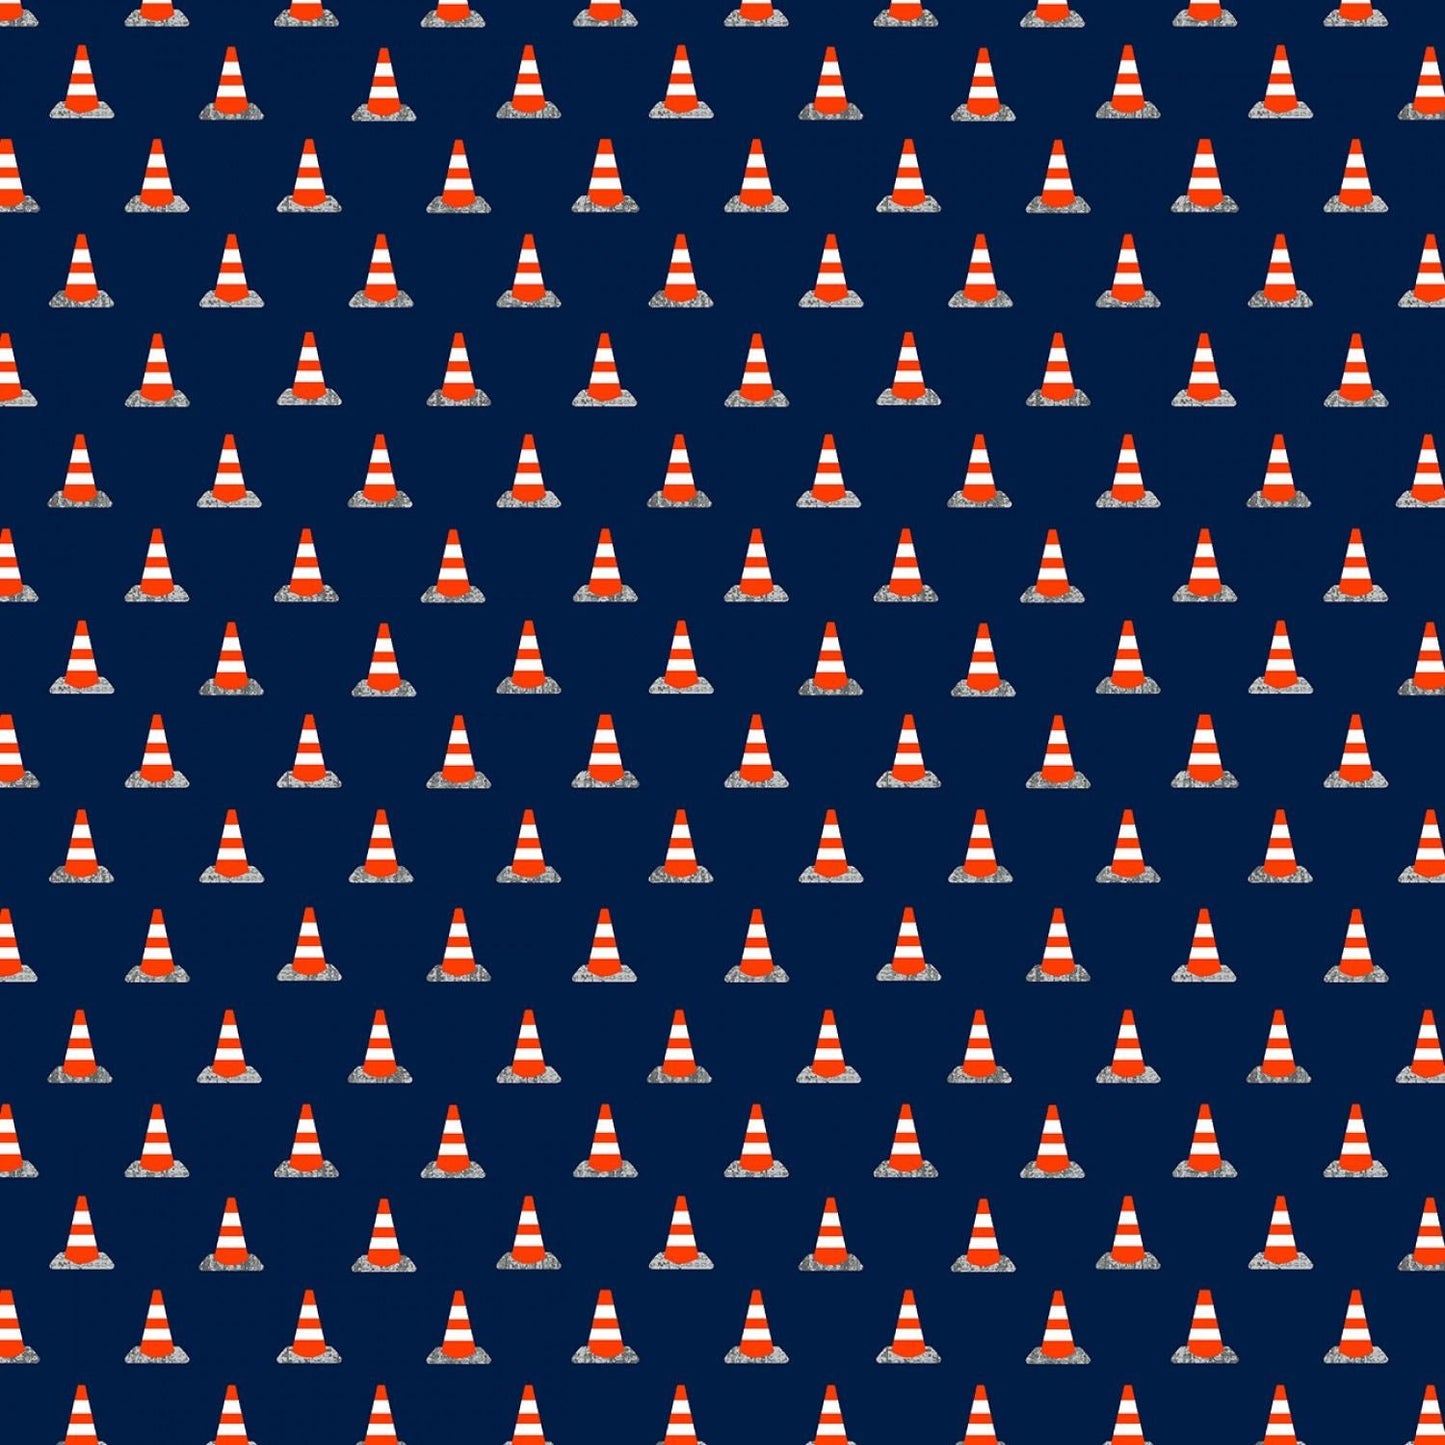 Work Zone by Whistler Studios Cones Navy 52268-2 Cotton Woven Fabric